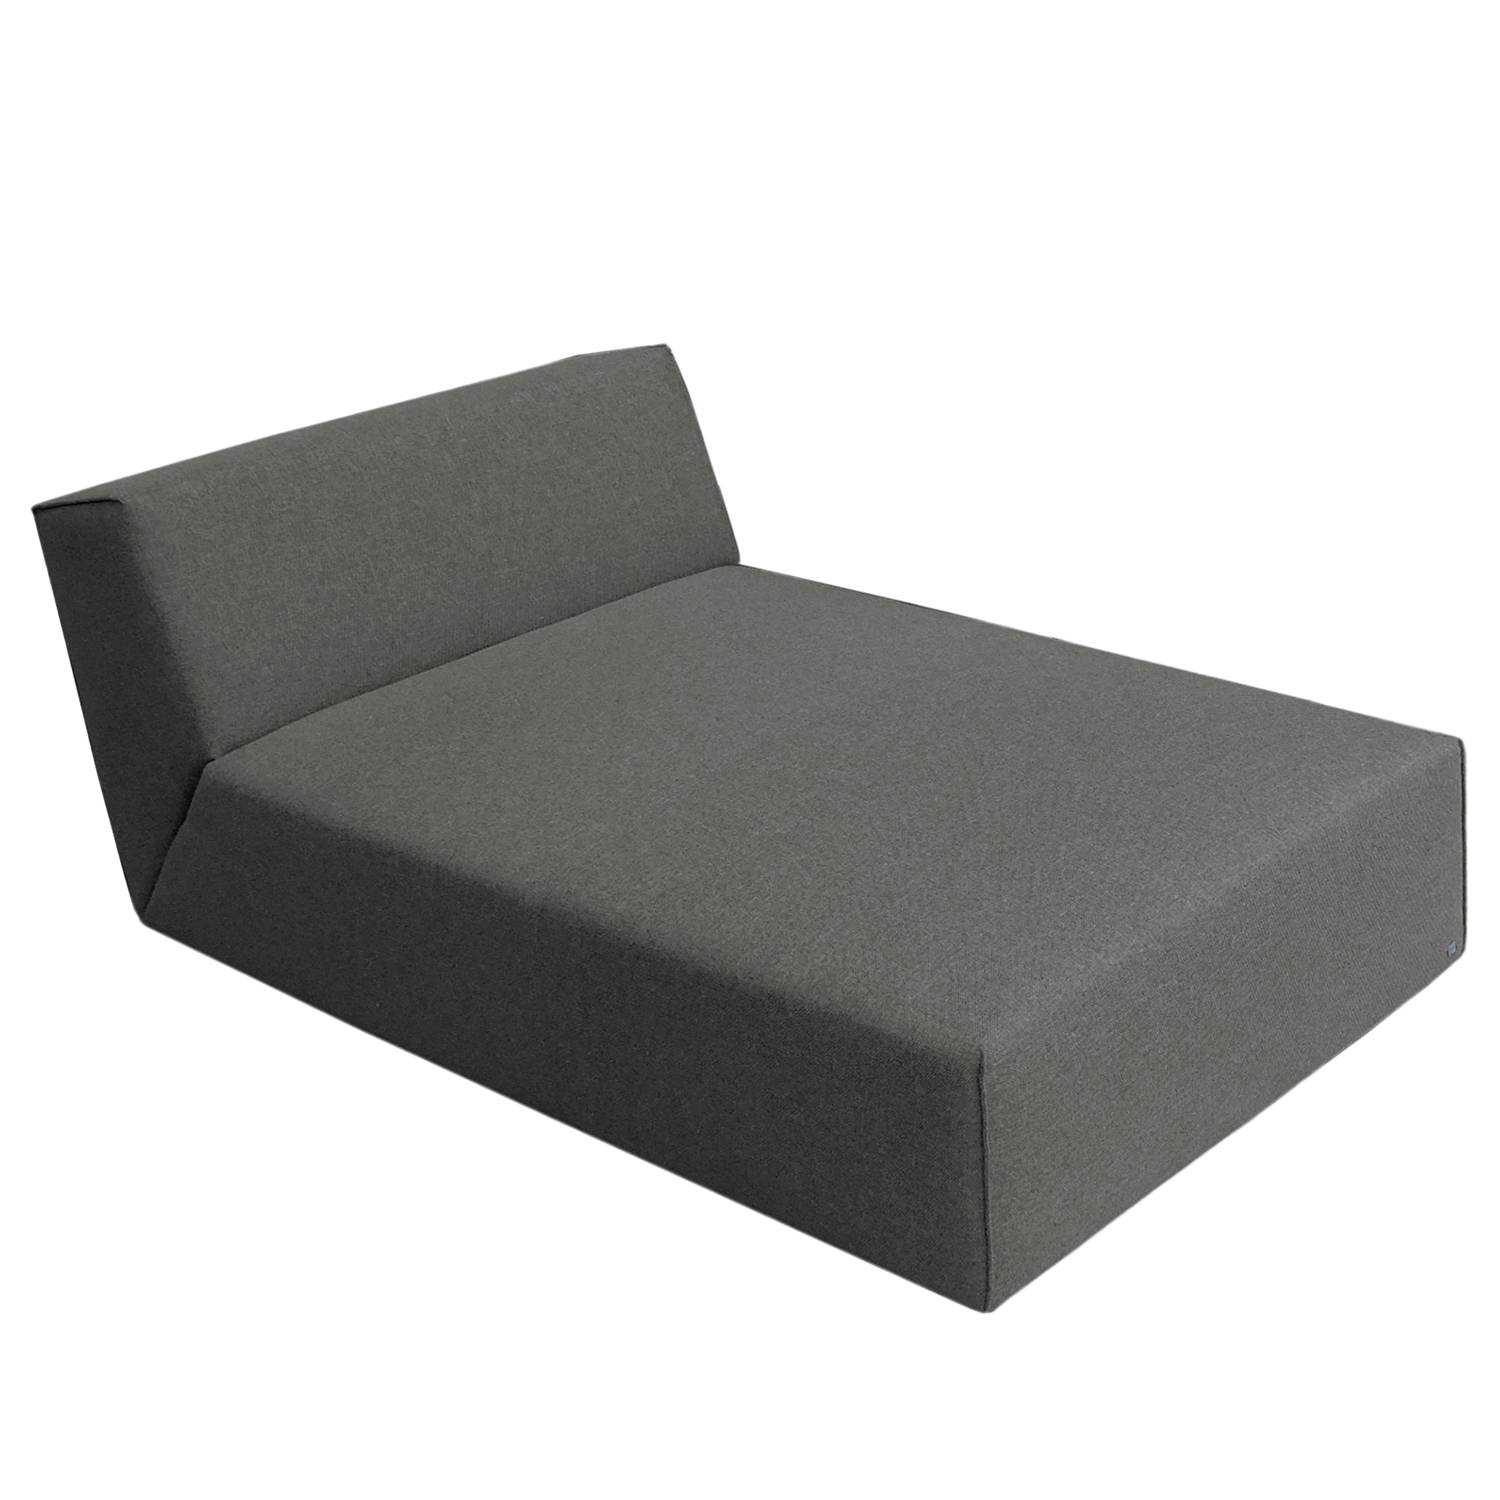 Home24 Ligfauteuil Elements, Tom Tailor